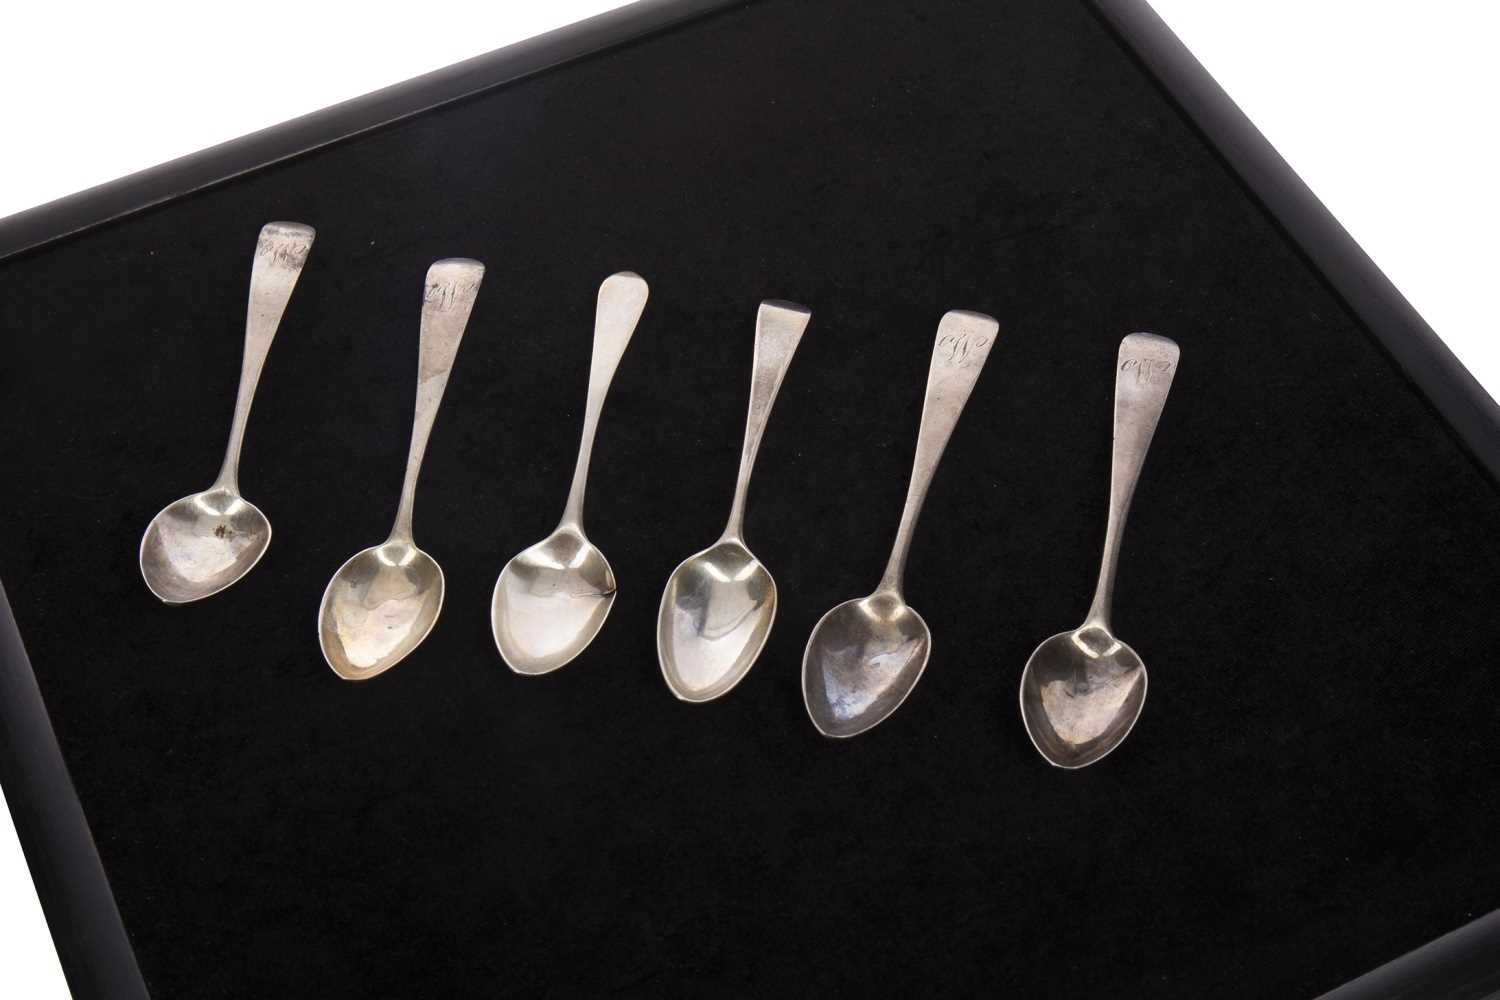 Lot 802 - A SET OF FOUR 19TH CENTURY SCOTTISH PROVINCIAL SILVER TEASPOONS ALONG WITH TWO OTHERS